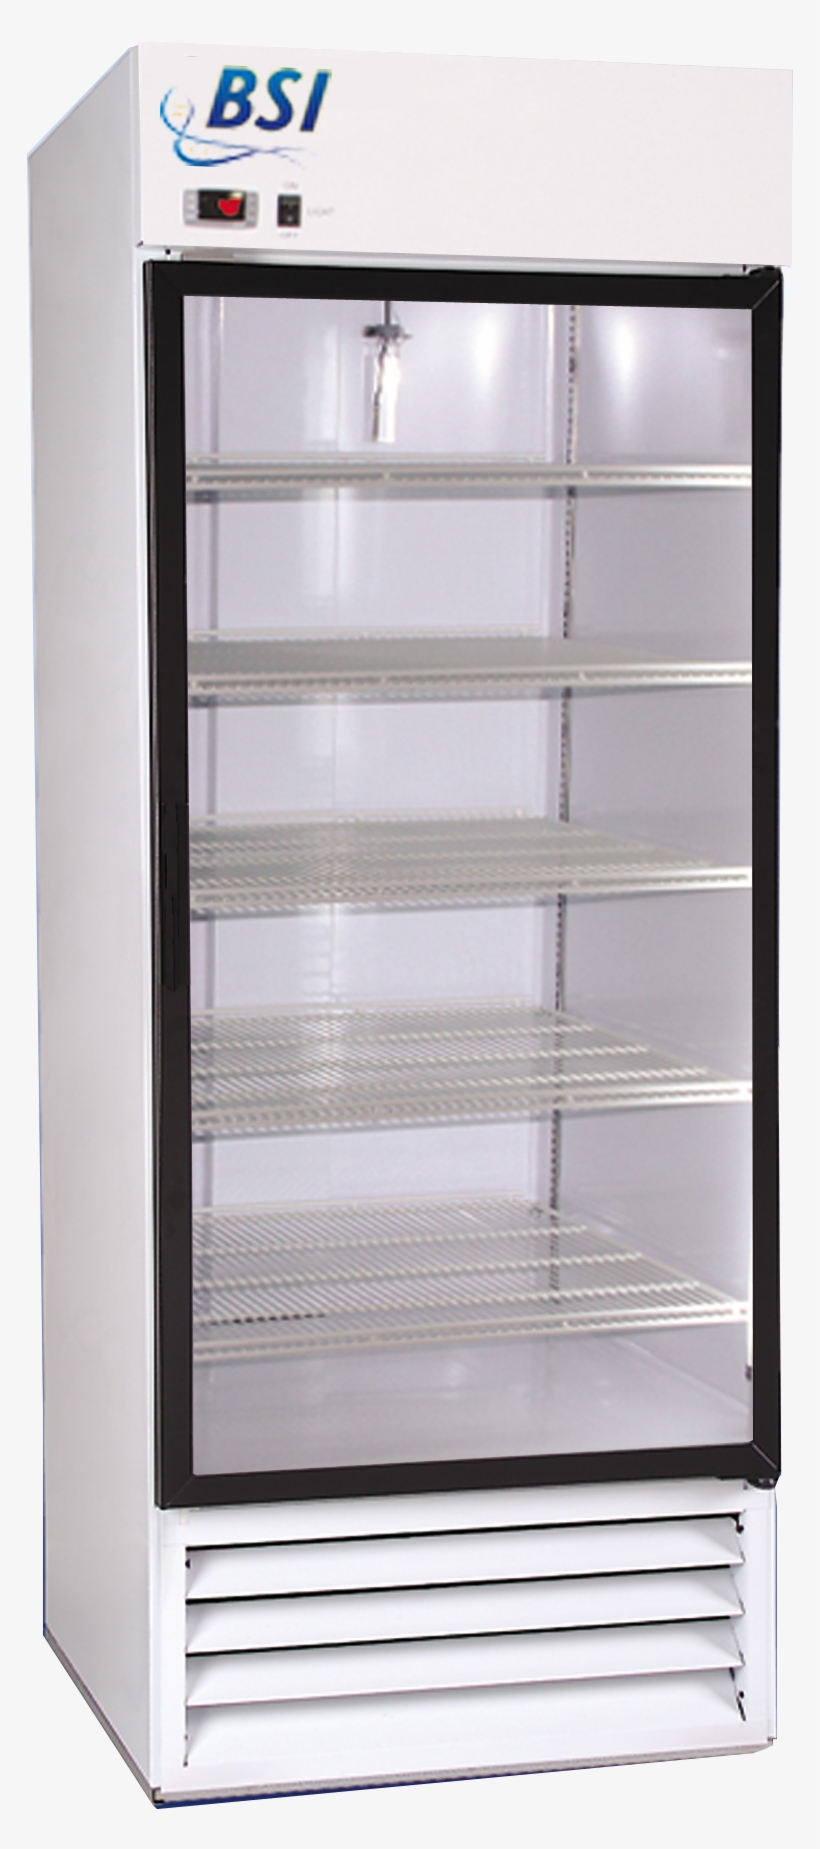 S23gbrlr - So-low Laboratory Refrigerator Model Dh4-23gd, transparent png #3643974